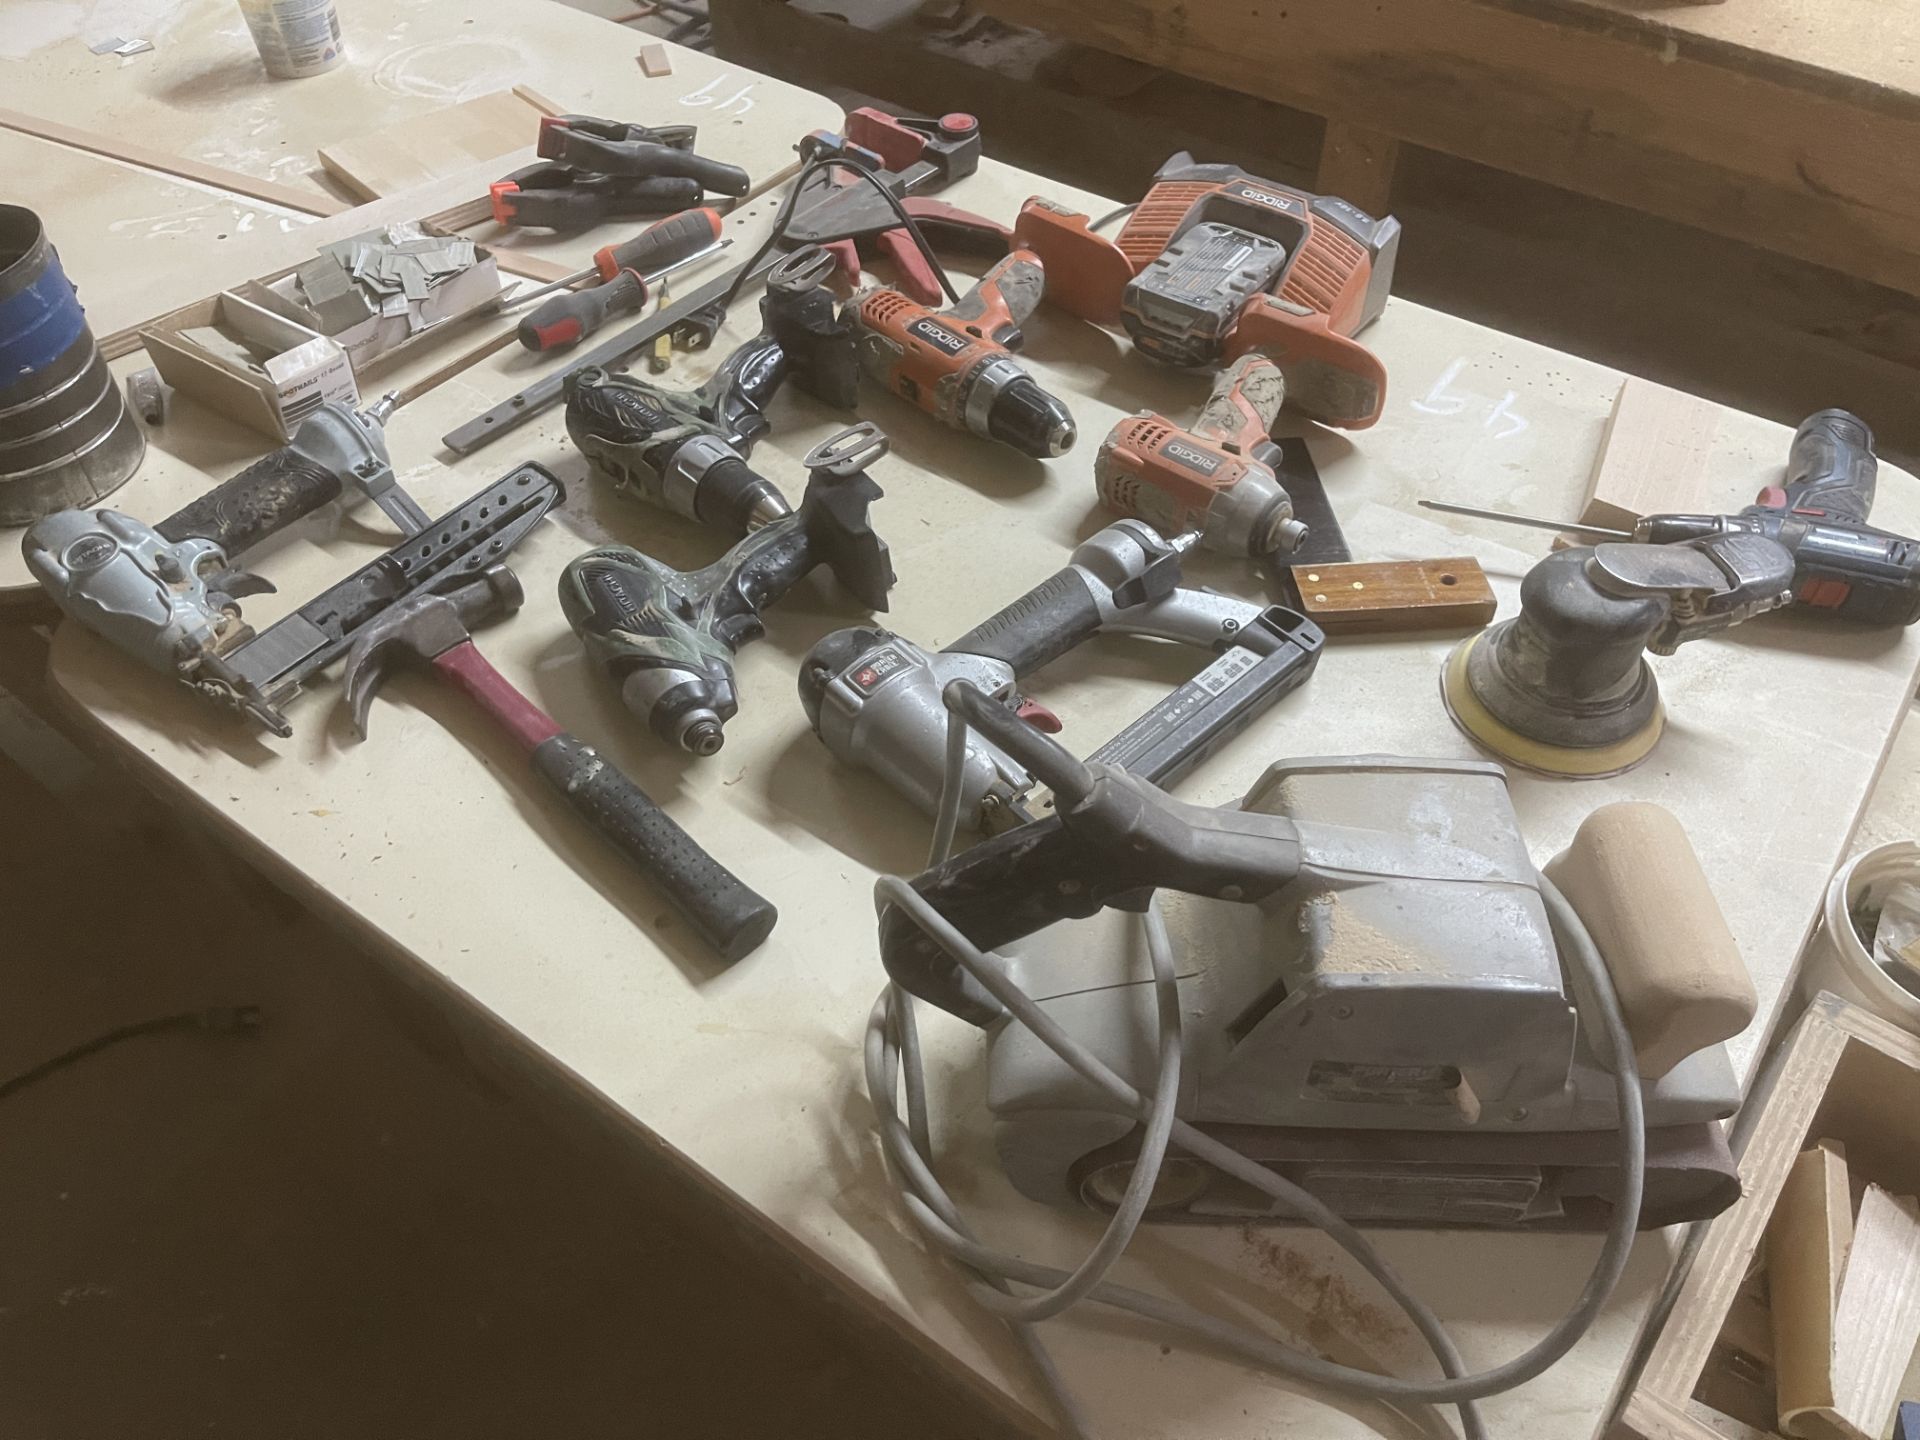 Rigid Drill, Pneumatic Sander, Pneumatic Porta Cable Stapler, Porta Cable Belt Sander, with Battery - Image 3 of 5